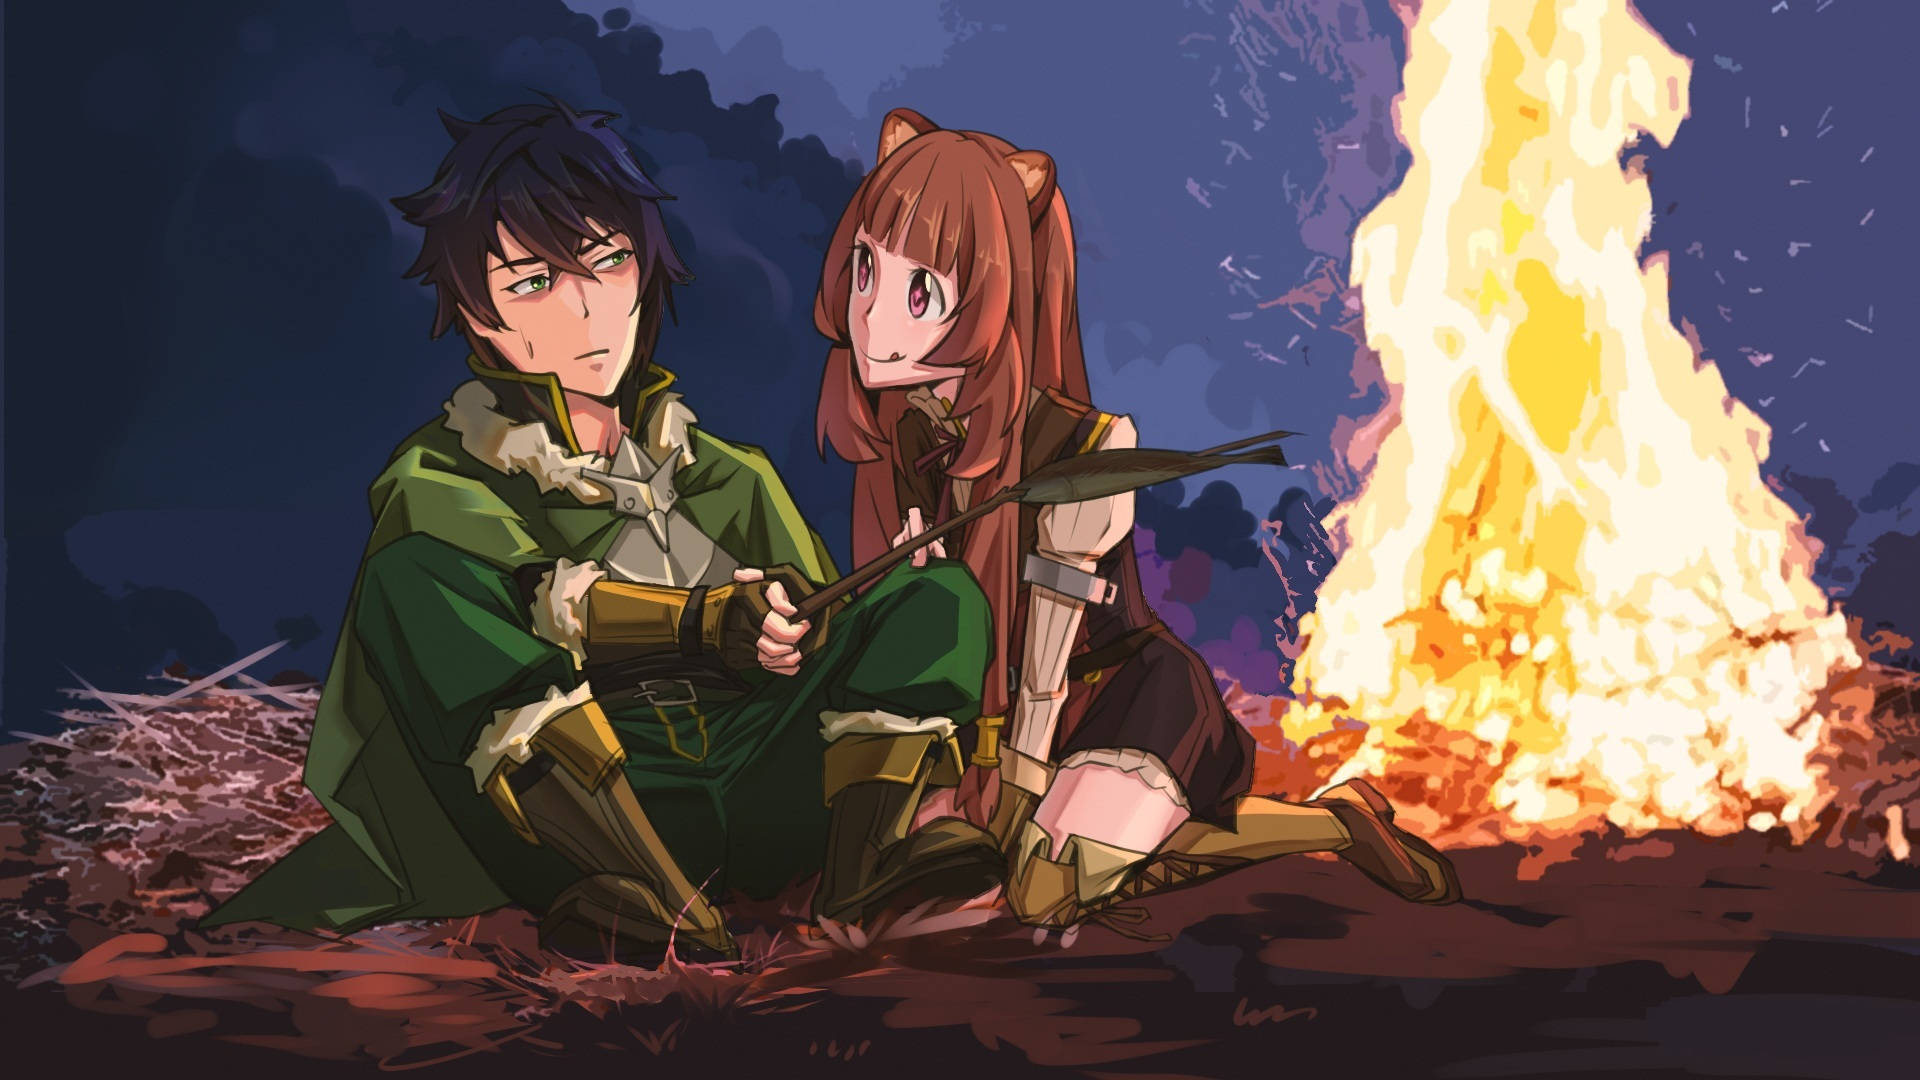 A Couple Sitting Next To A Fire